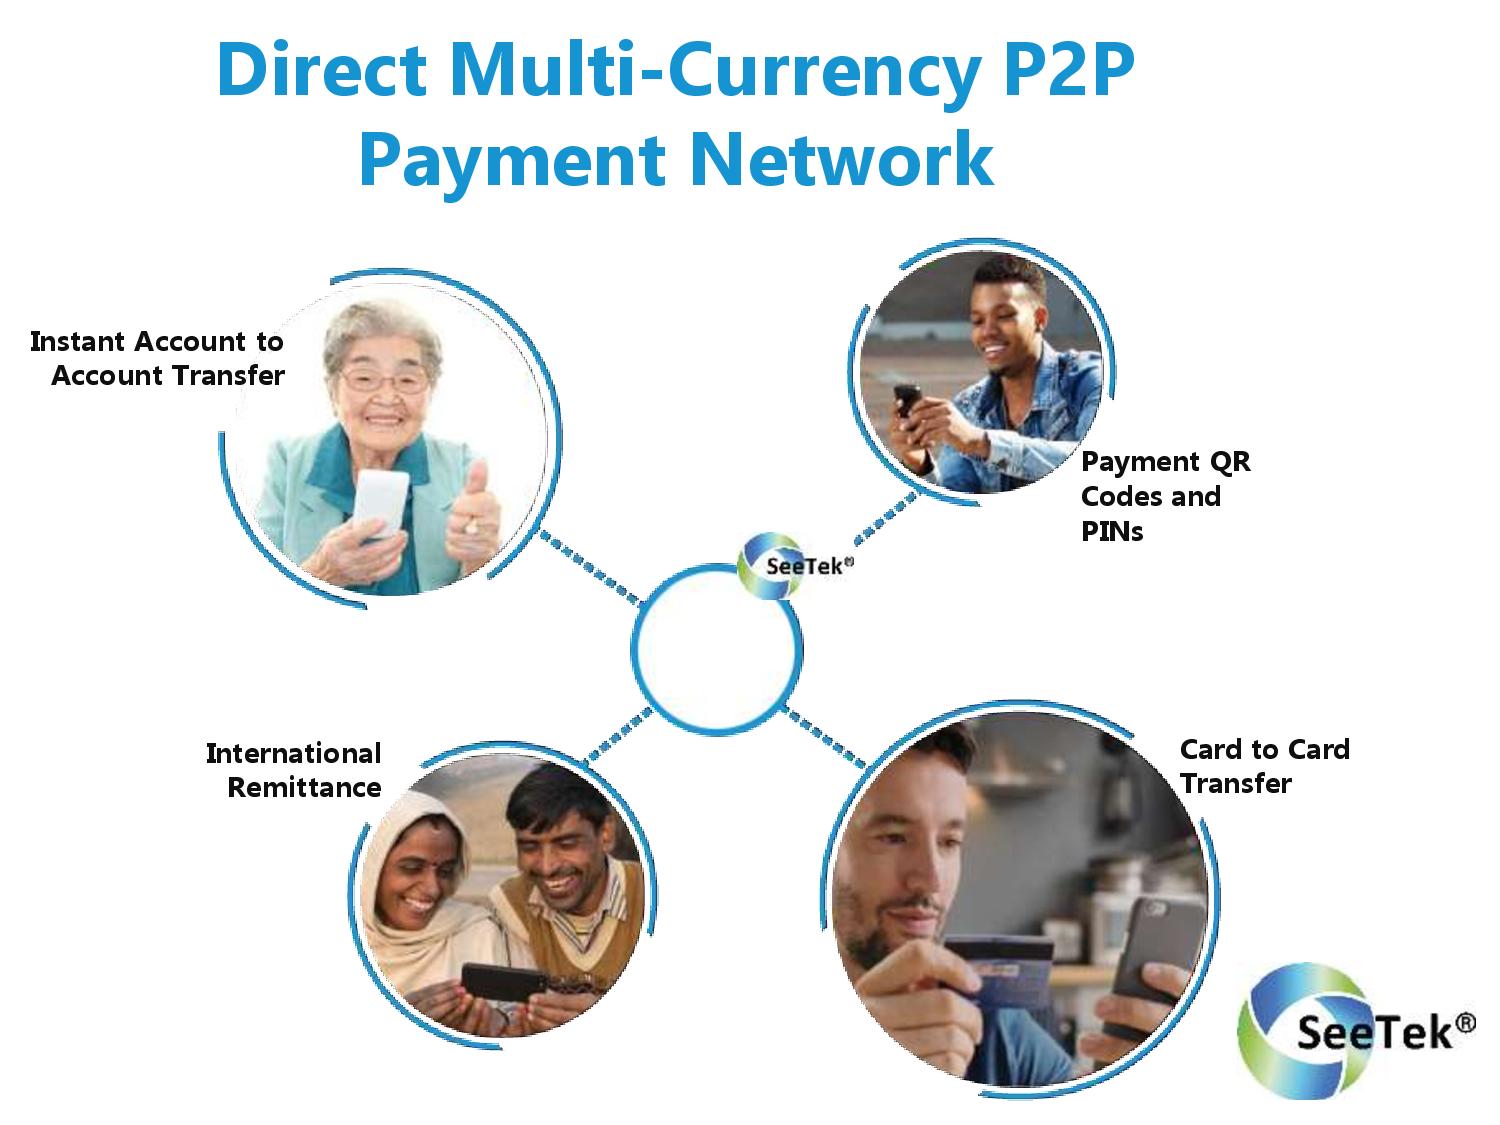 Direct Multi-Currency P2P Payment Network